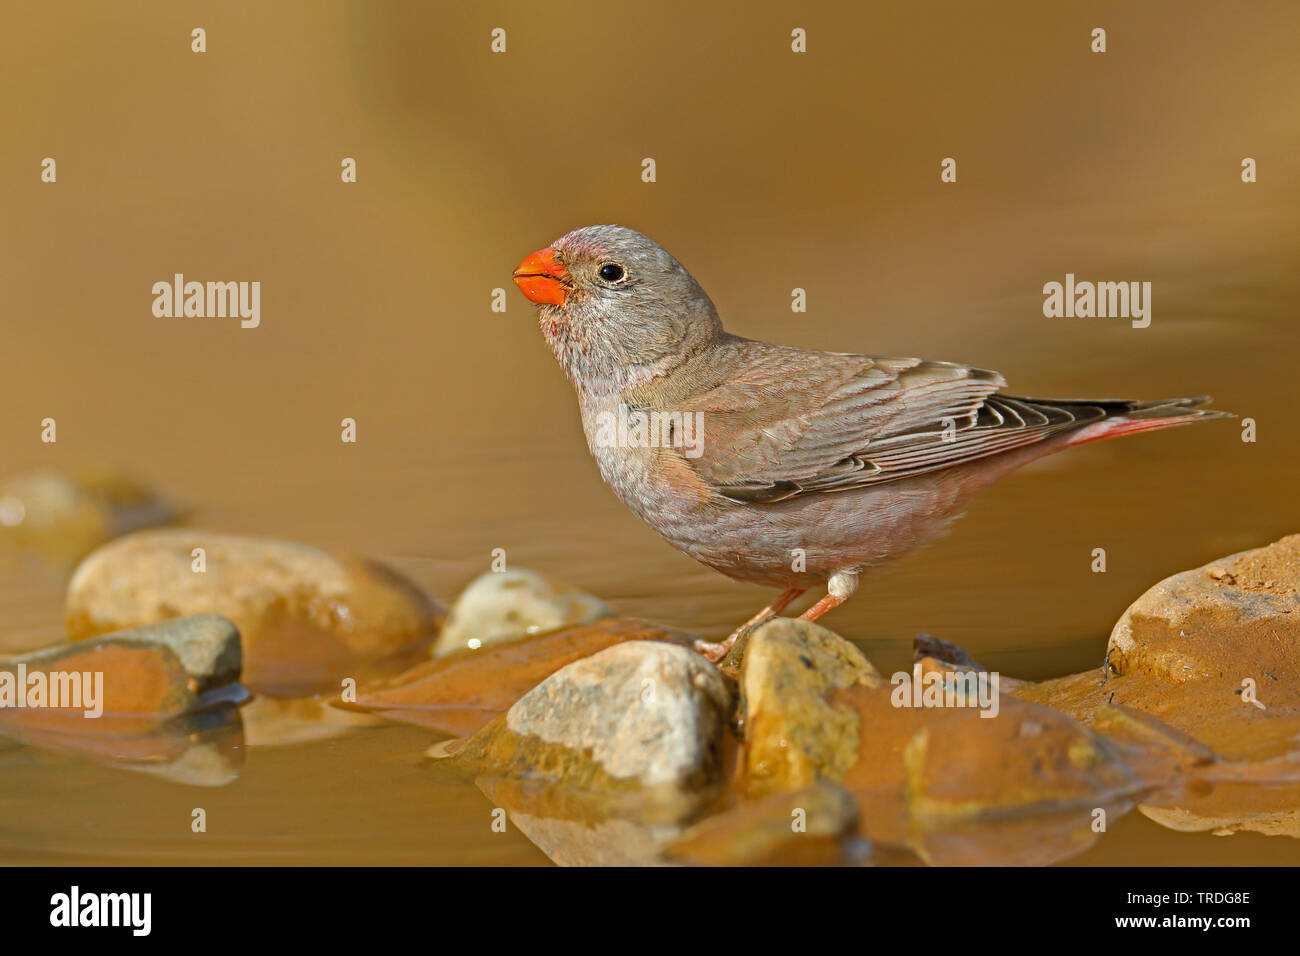 trumpeter finch (Rhodopechys githaginea, Bucanetes githagineus), perching at a water place, Morocco, Tazzarine Stock Photo